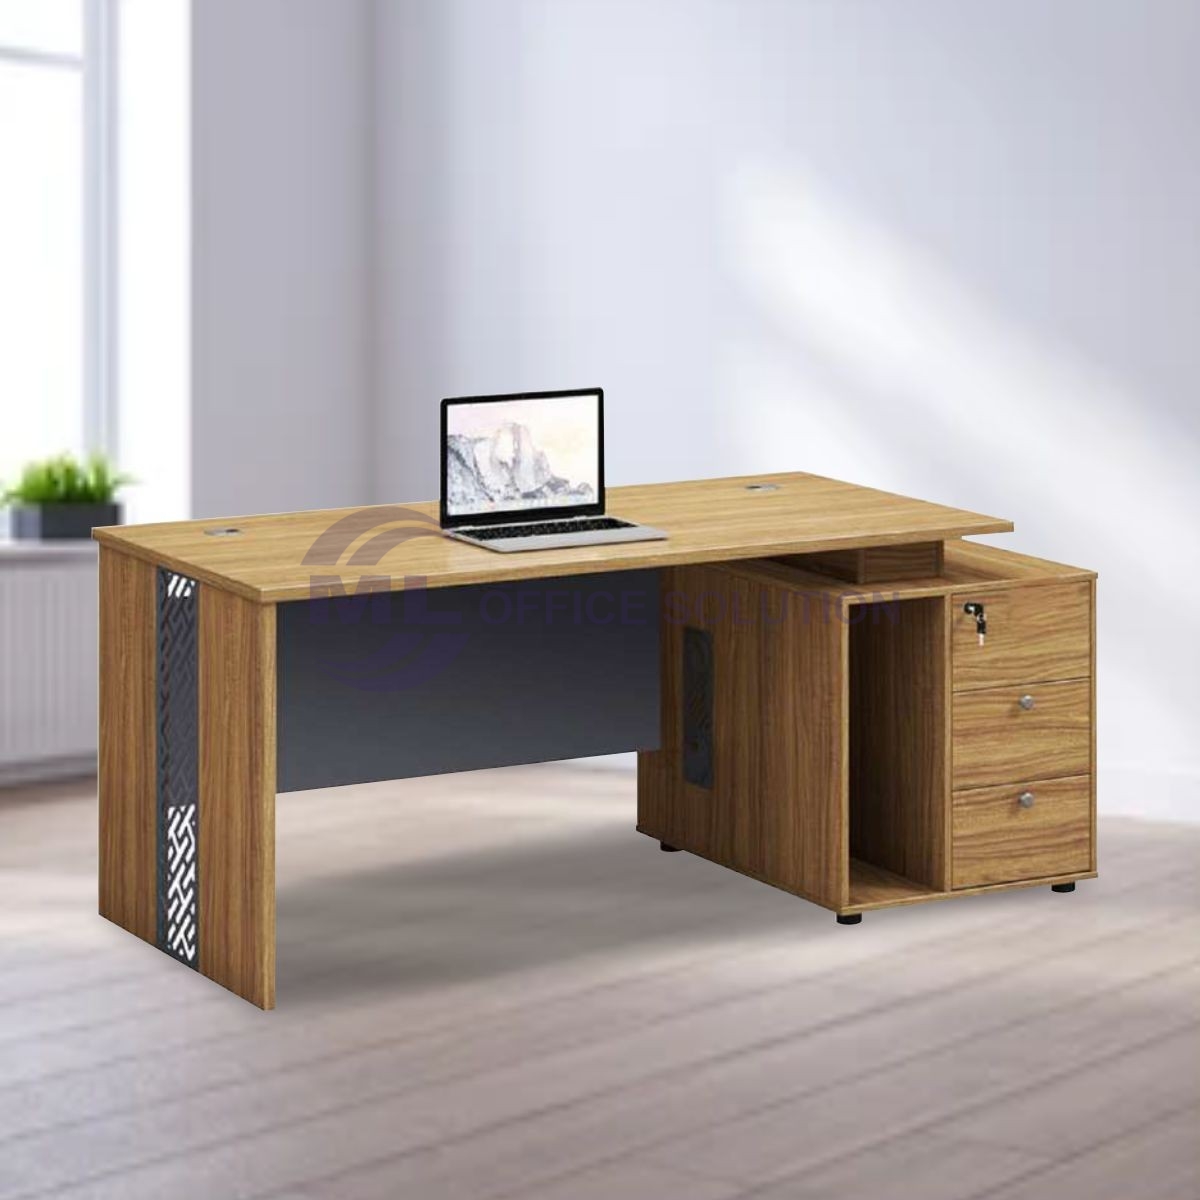 Modern Executive Table With Storage